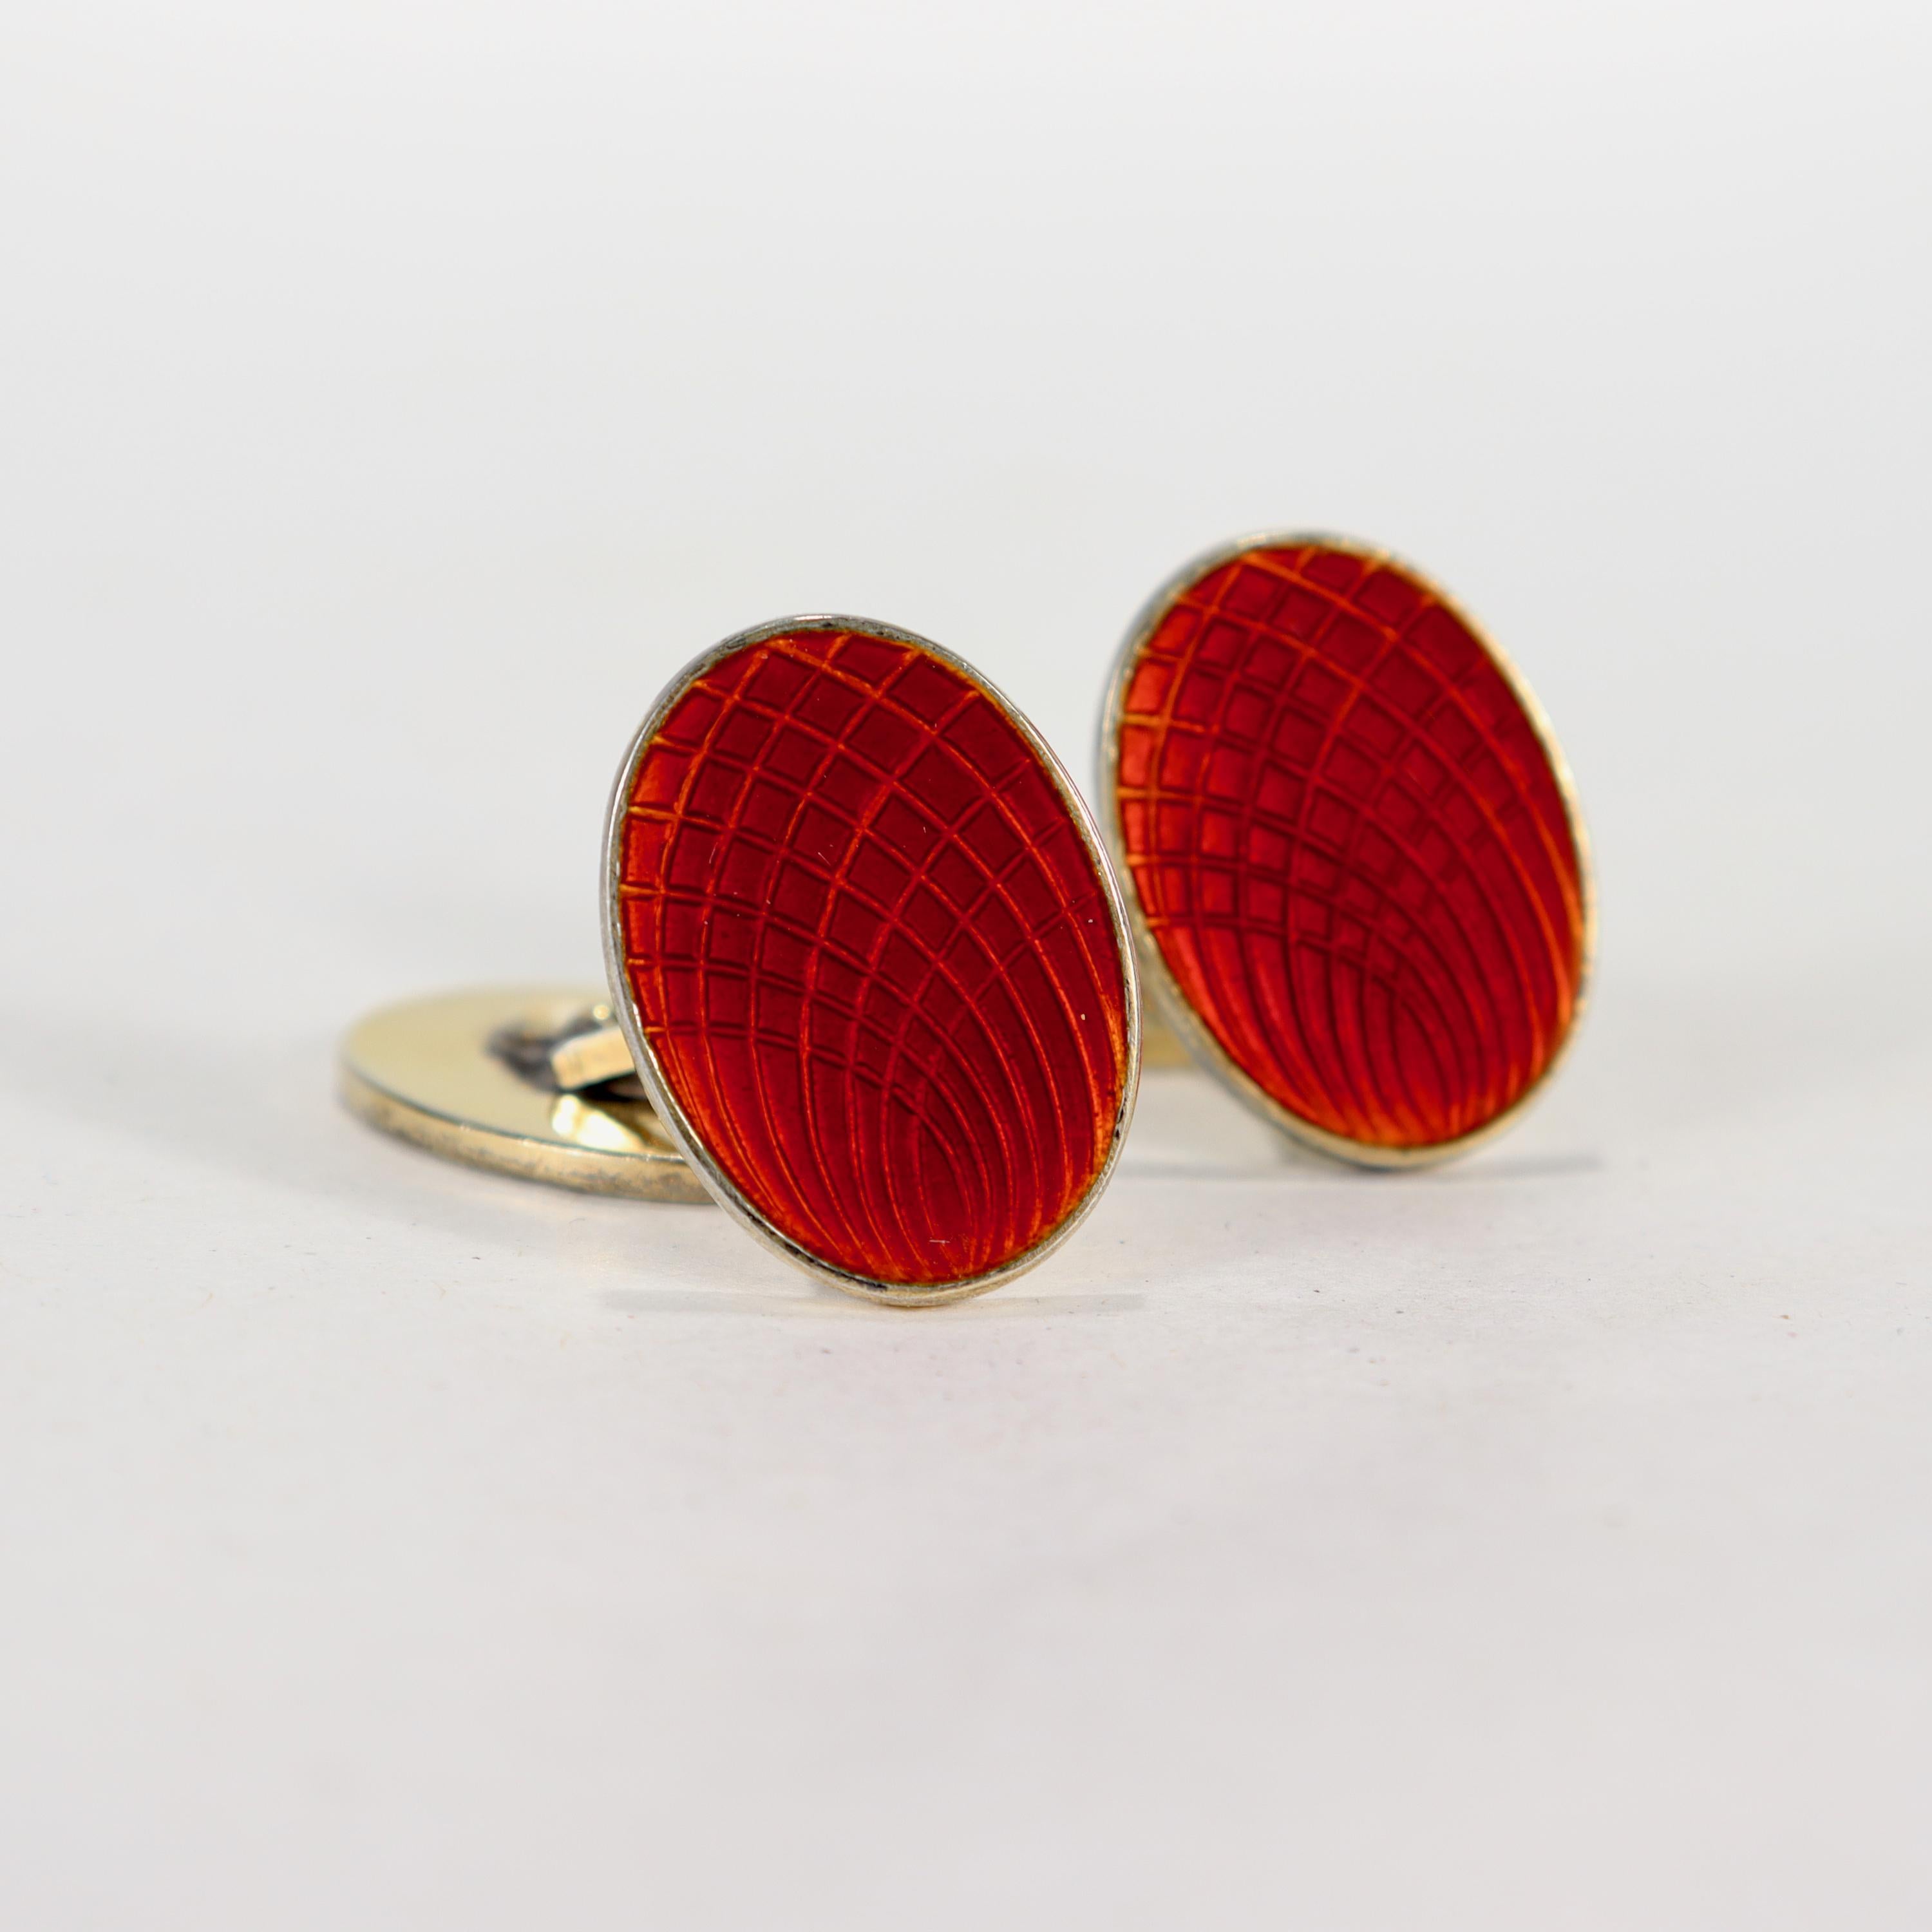 A fine pair of Norwegian cufflinks.

By N.M. Thune of Oslo, Norway.

In sterling silver with a gilt finish and red guilloche enamel. 

Simply great Scandinavian Modern cufflinks!

Date:
Mid-20th Century

Overall Condition:
They are in overall good,